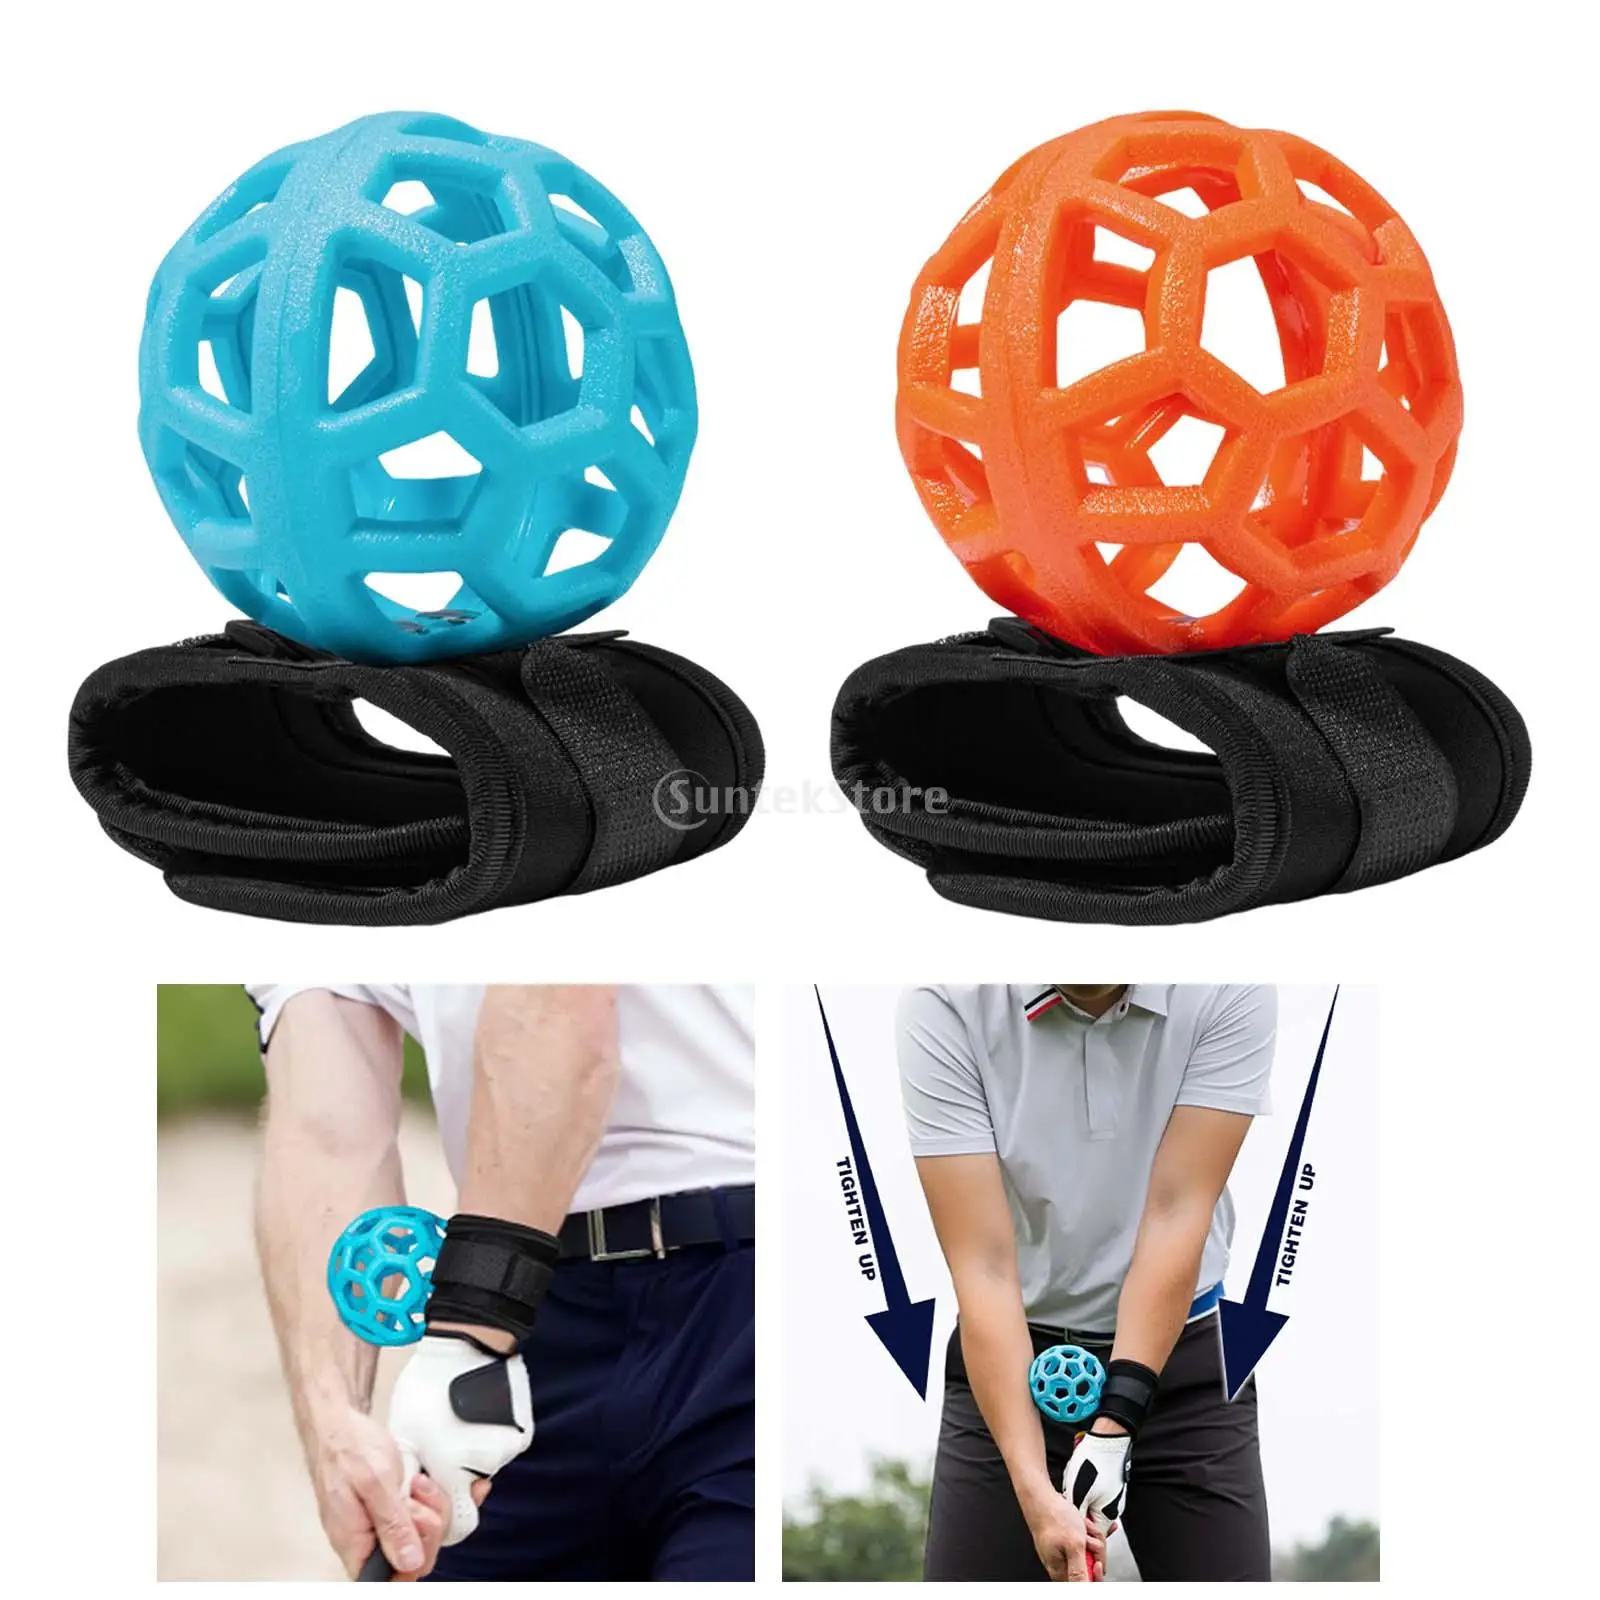 

Golf Swing Trainer Wrist Band Golf Alignment Practice Tool Position Correction Golf Swing Training Aid for Golf Beginners